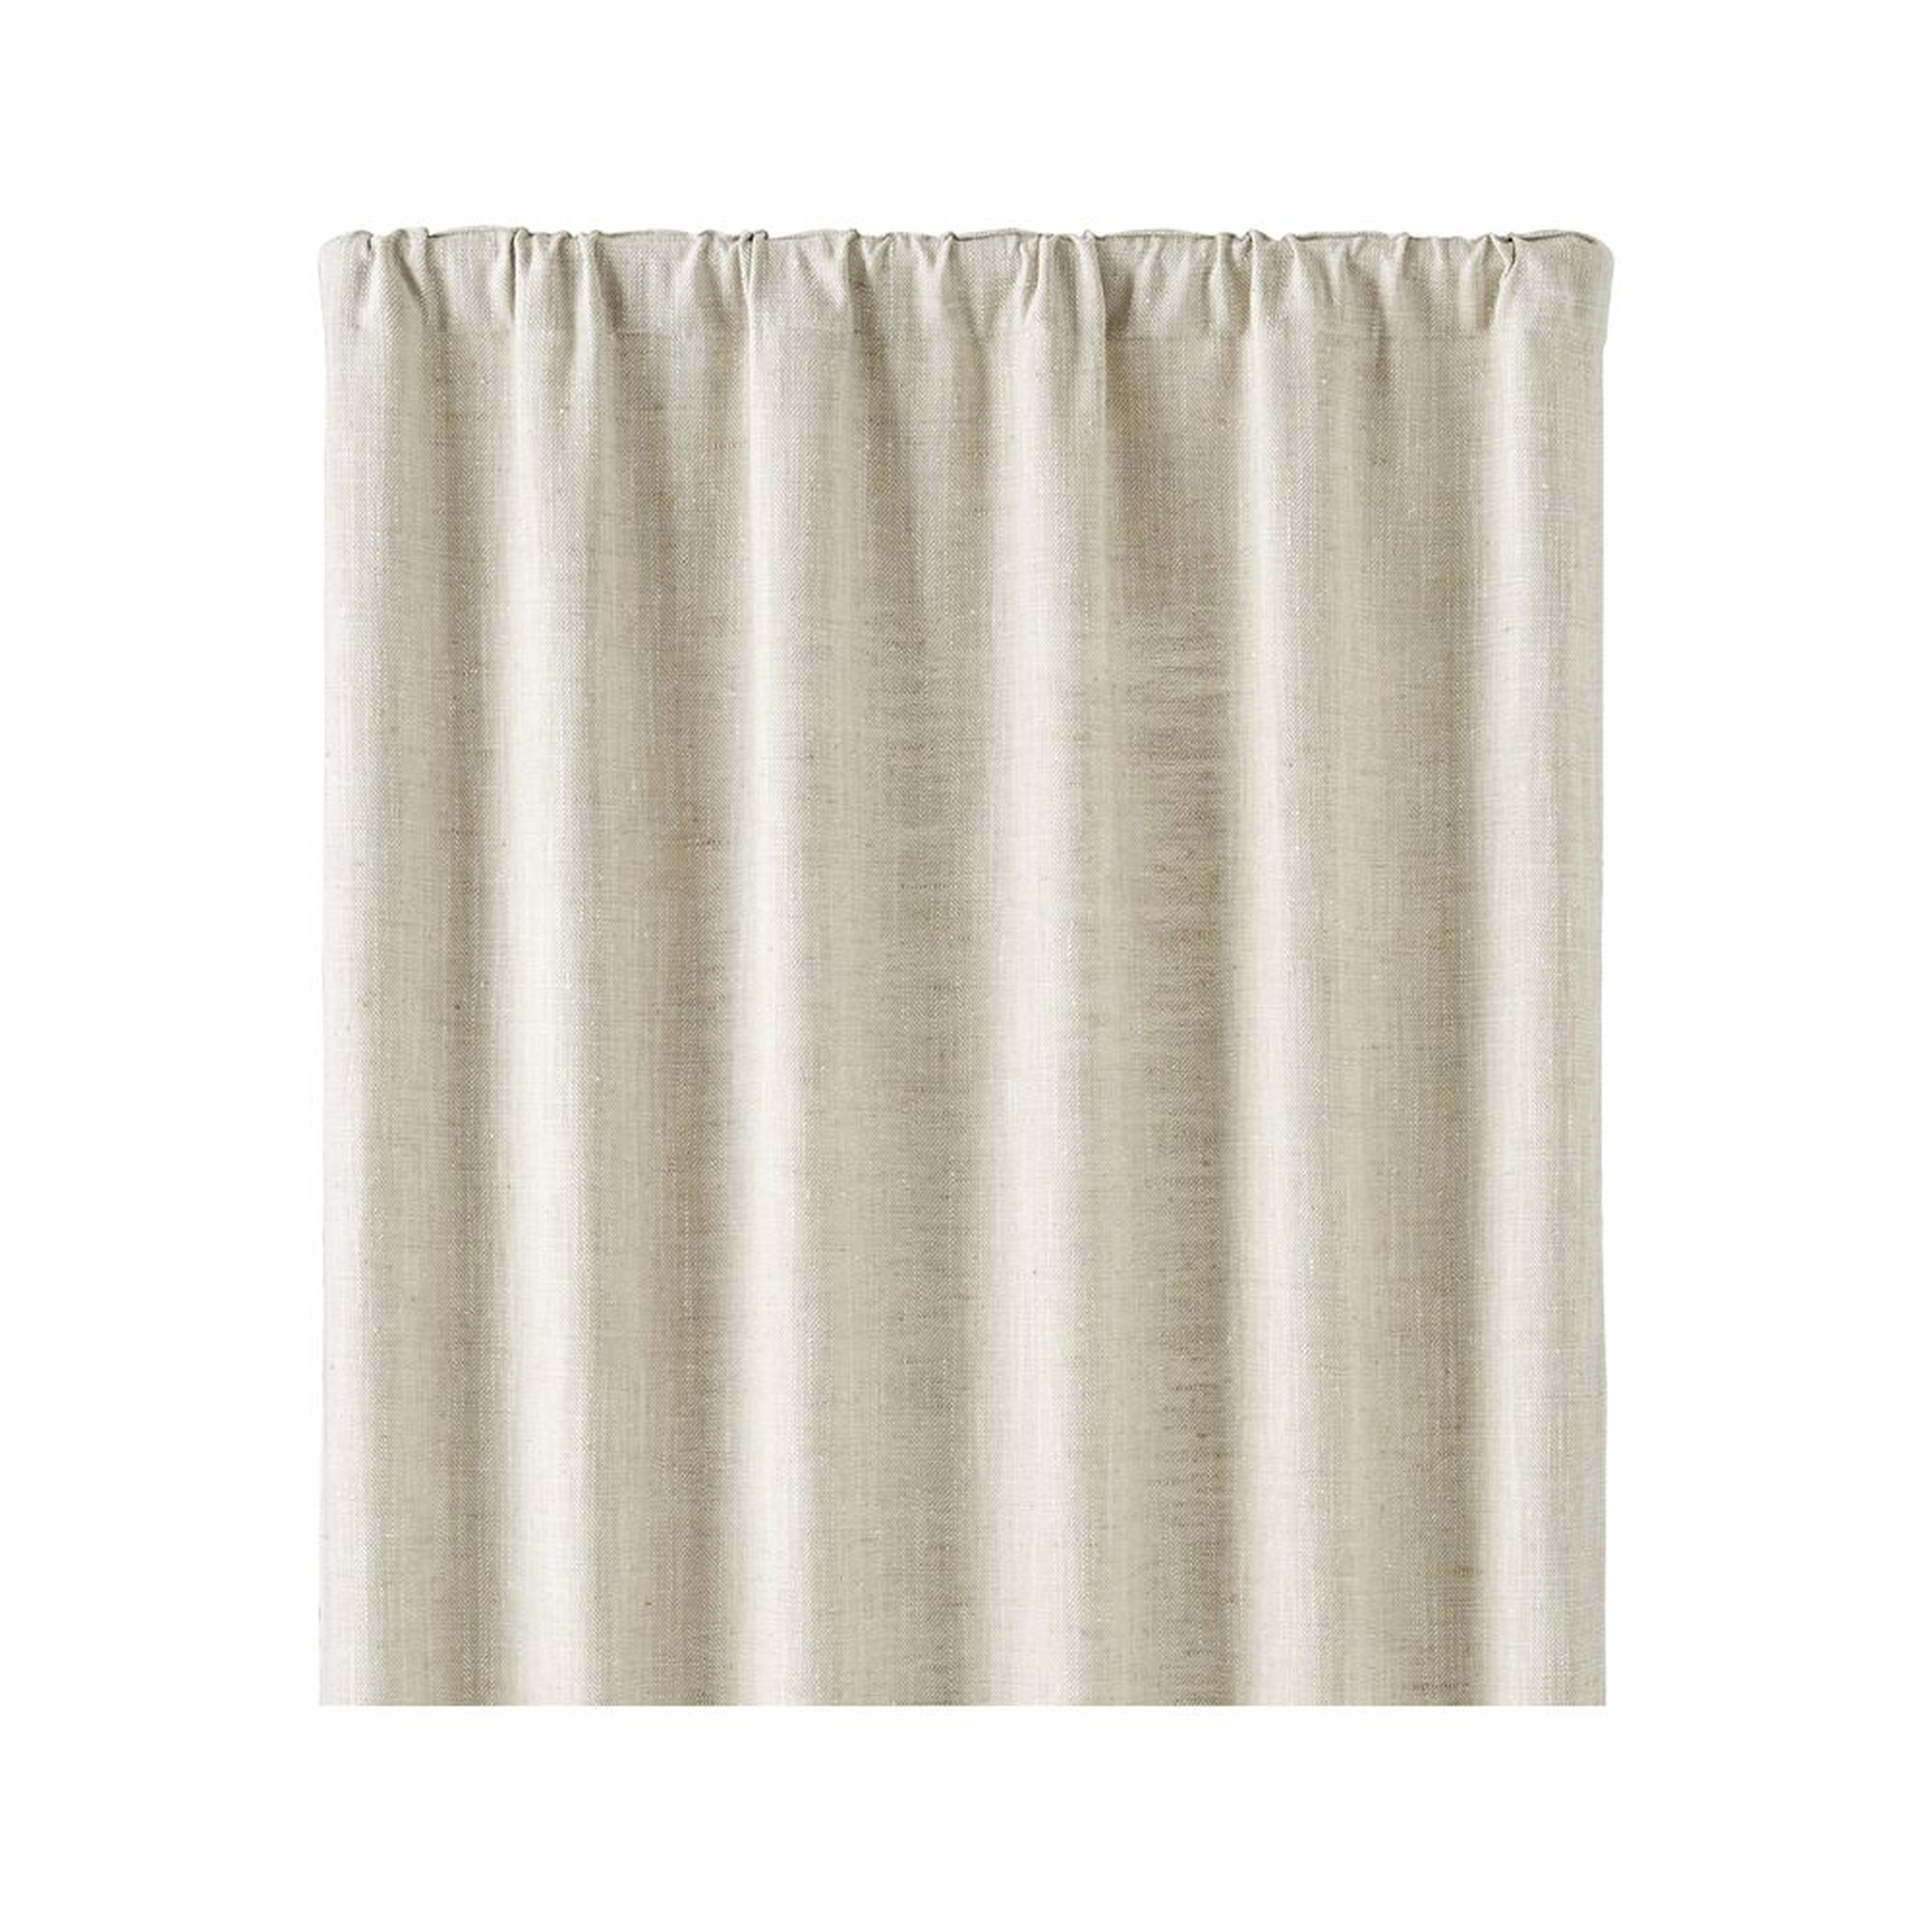 Reid Natural 48"x96" Curtain Panel - Crate and Barrel